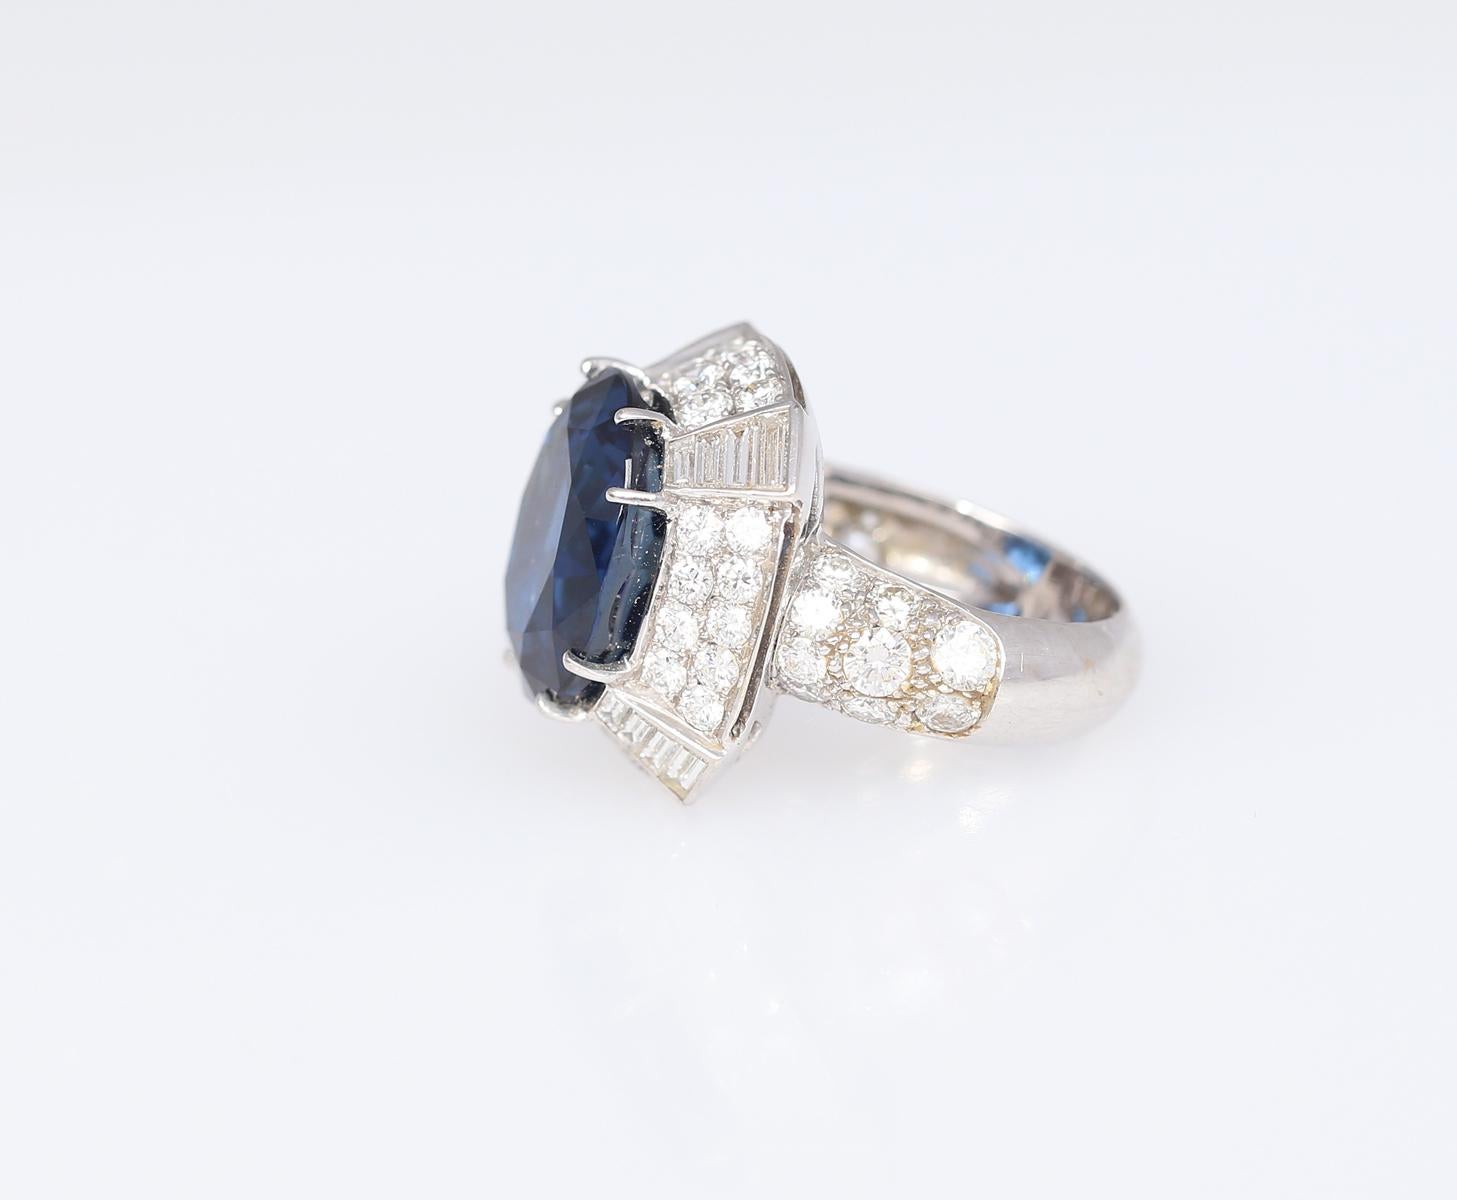 14.6 Ct Natural Sapphire Certified Diamond Ring 18K Gold, 1998 For Sale 2